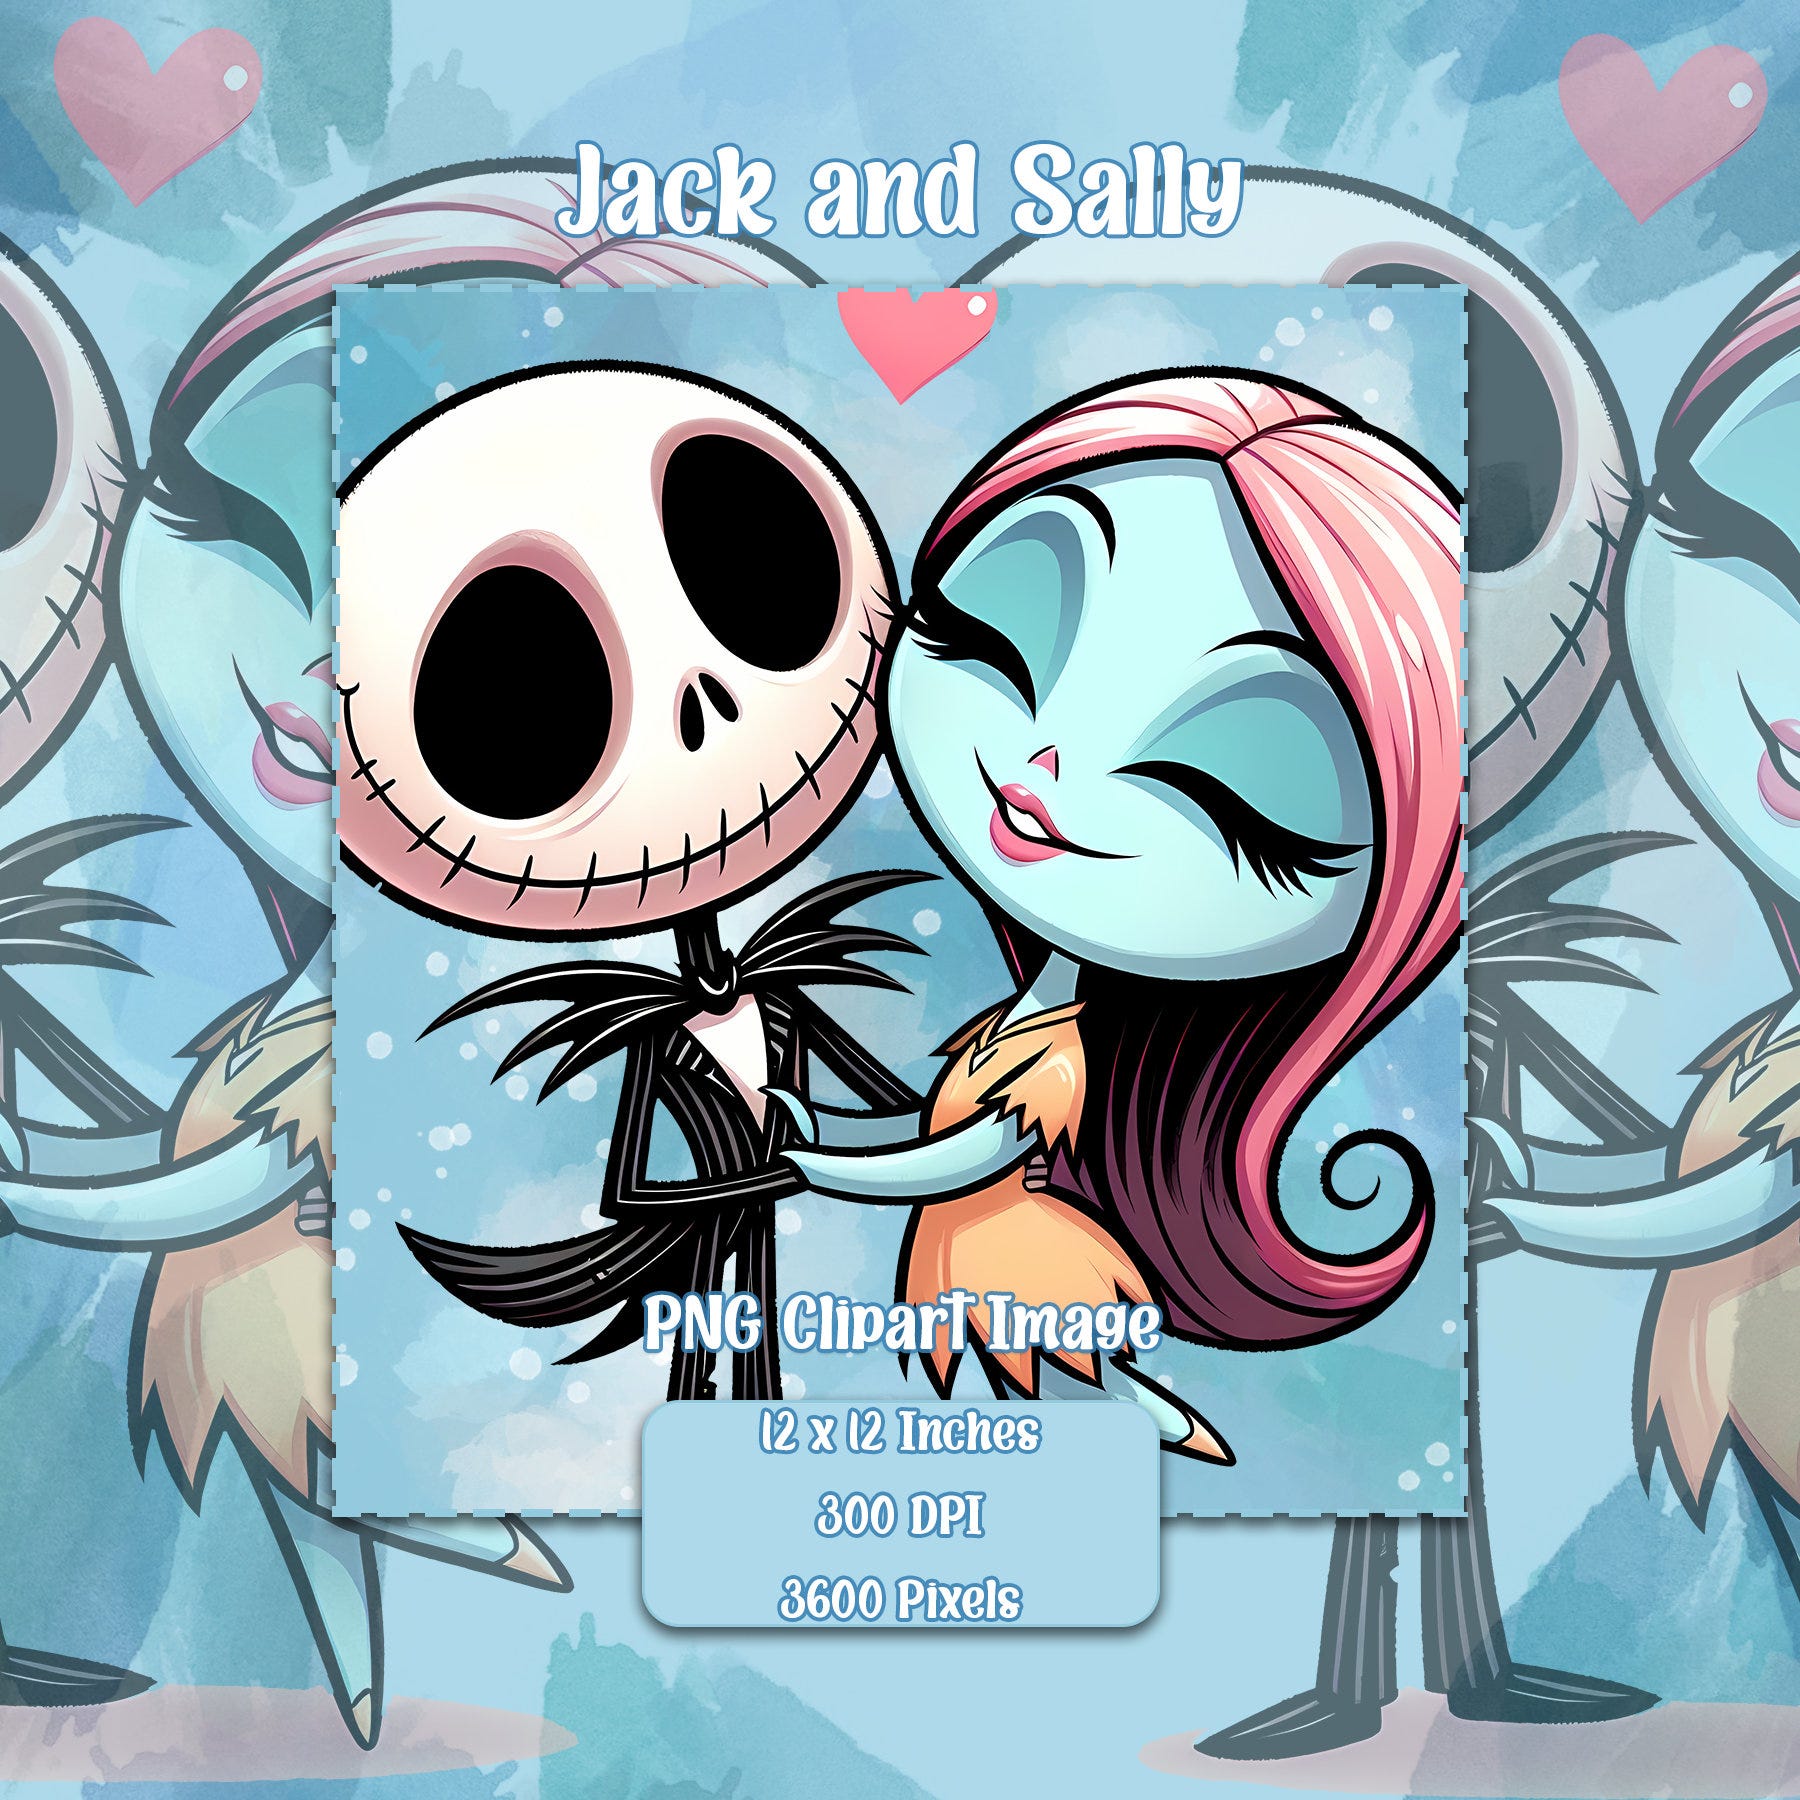 Jack and Sally Valentine PNG, Transparent Background Clipart Images, Commercial License Files, Nightmare Graphics